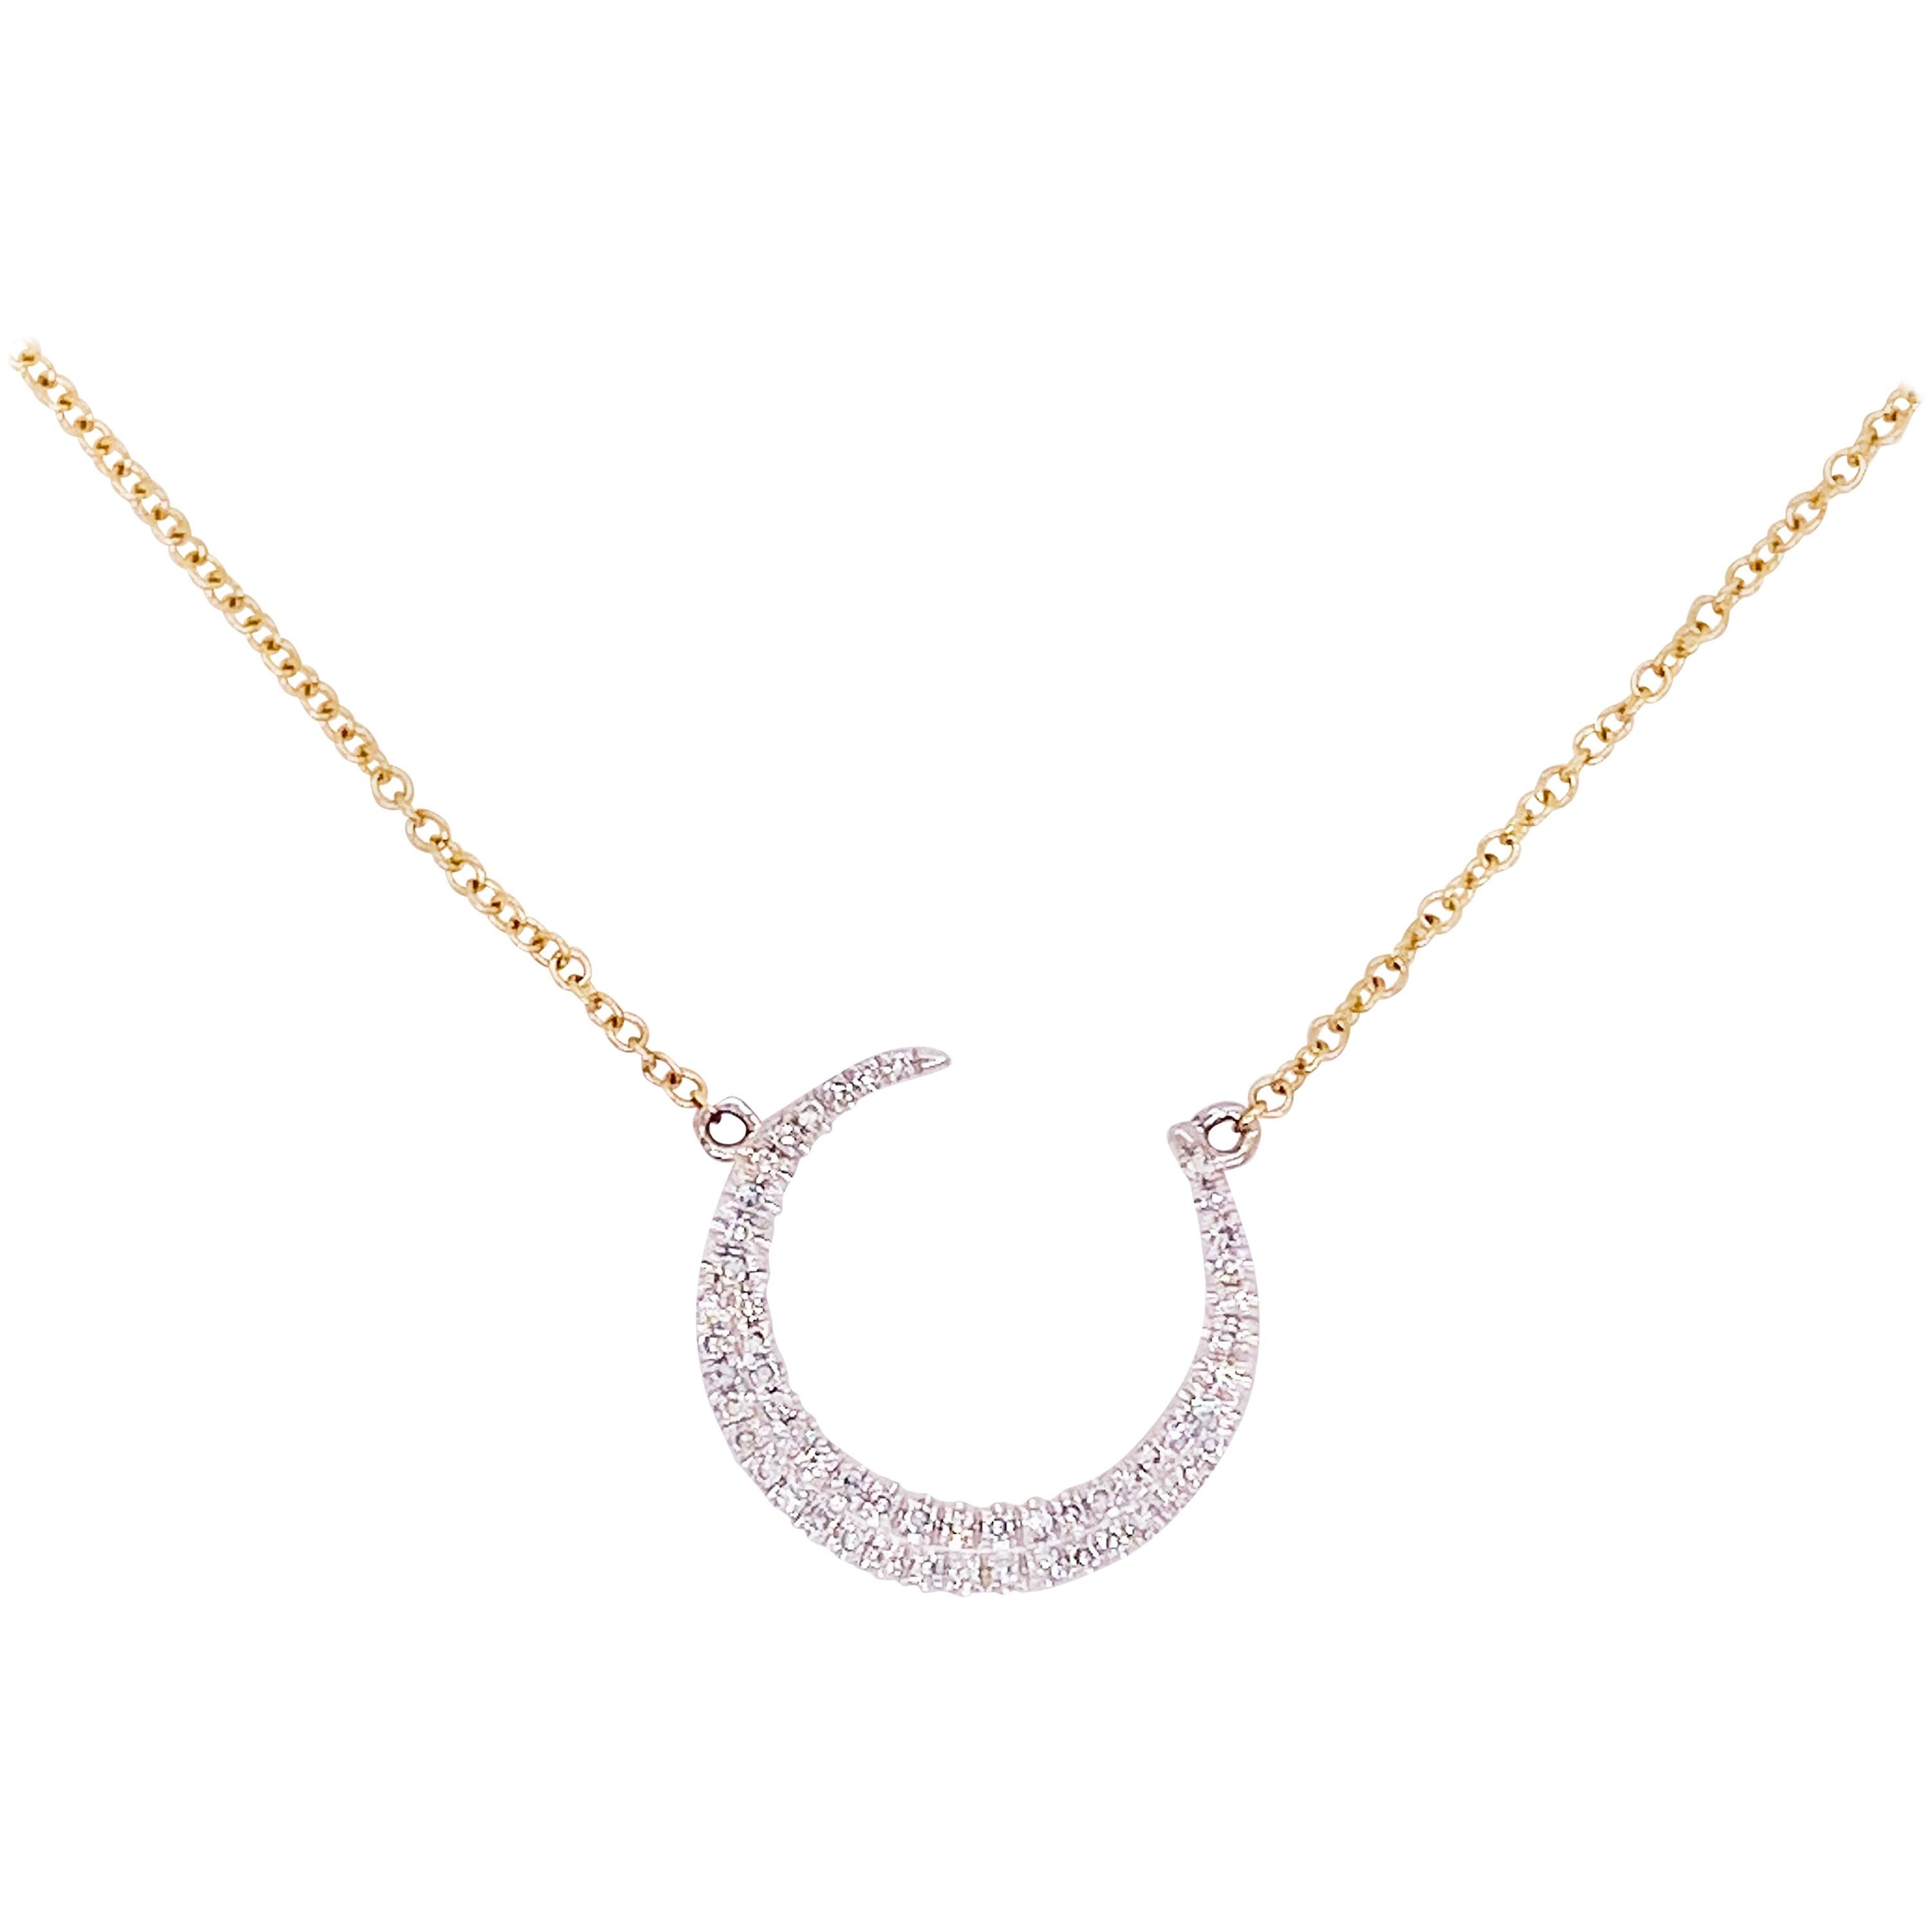 Crescent Moon Diamond Necklace, 14k White and Yellow Gold, Mixed Metal, Adjust For Sale